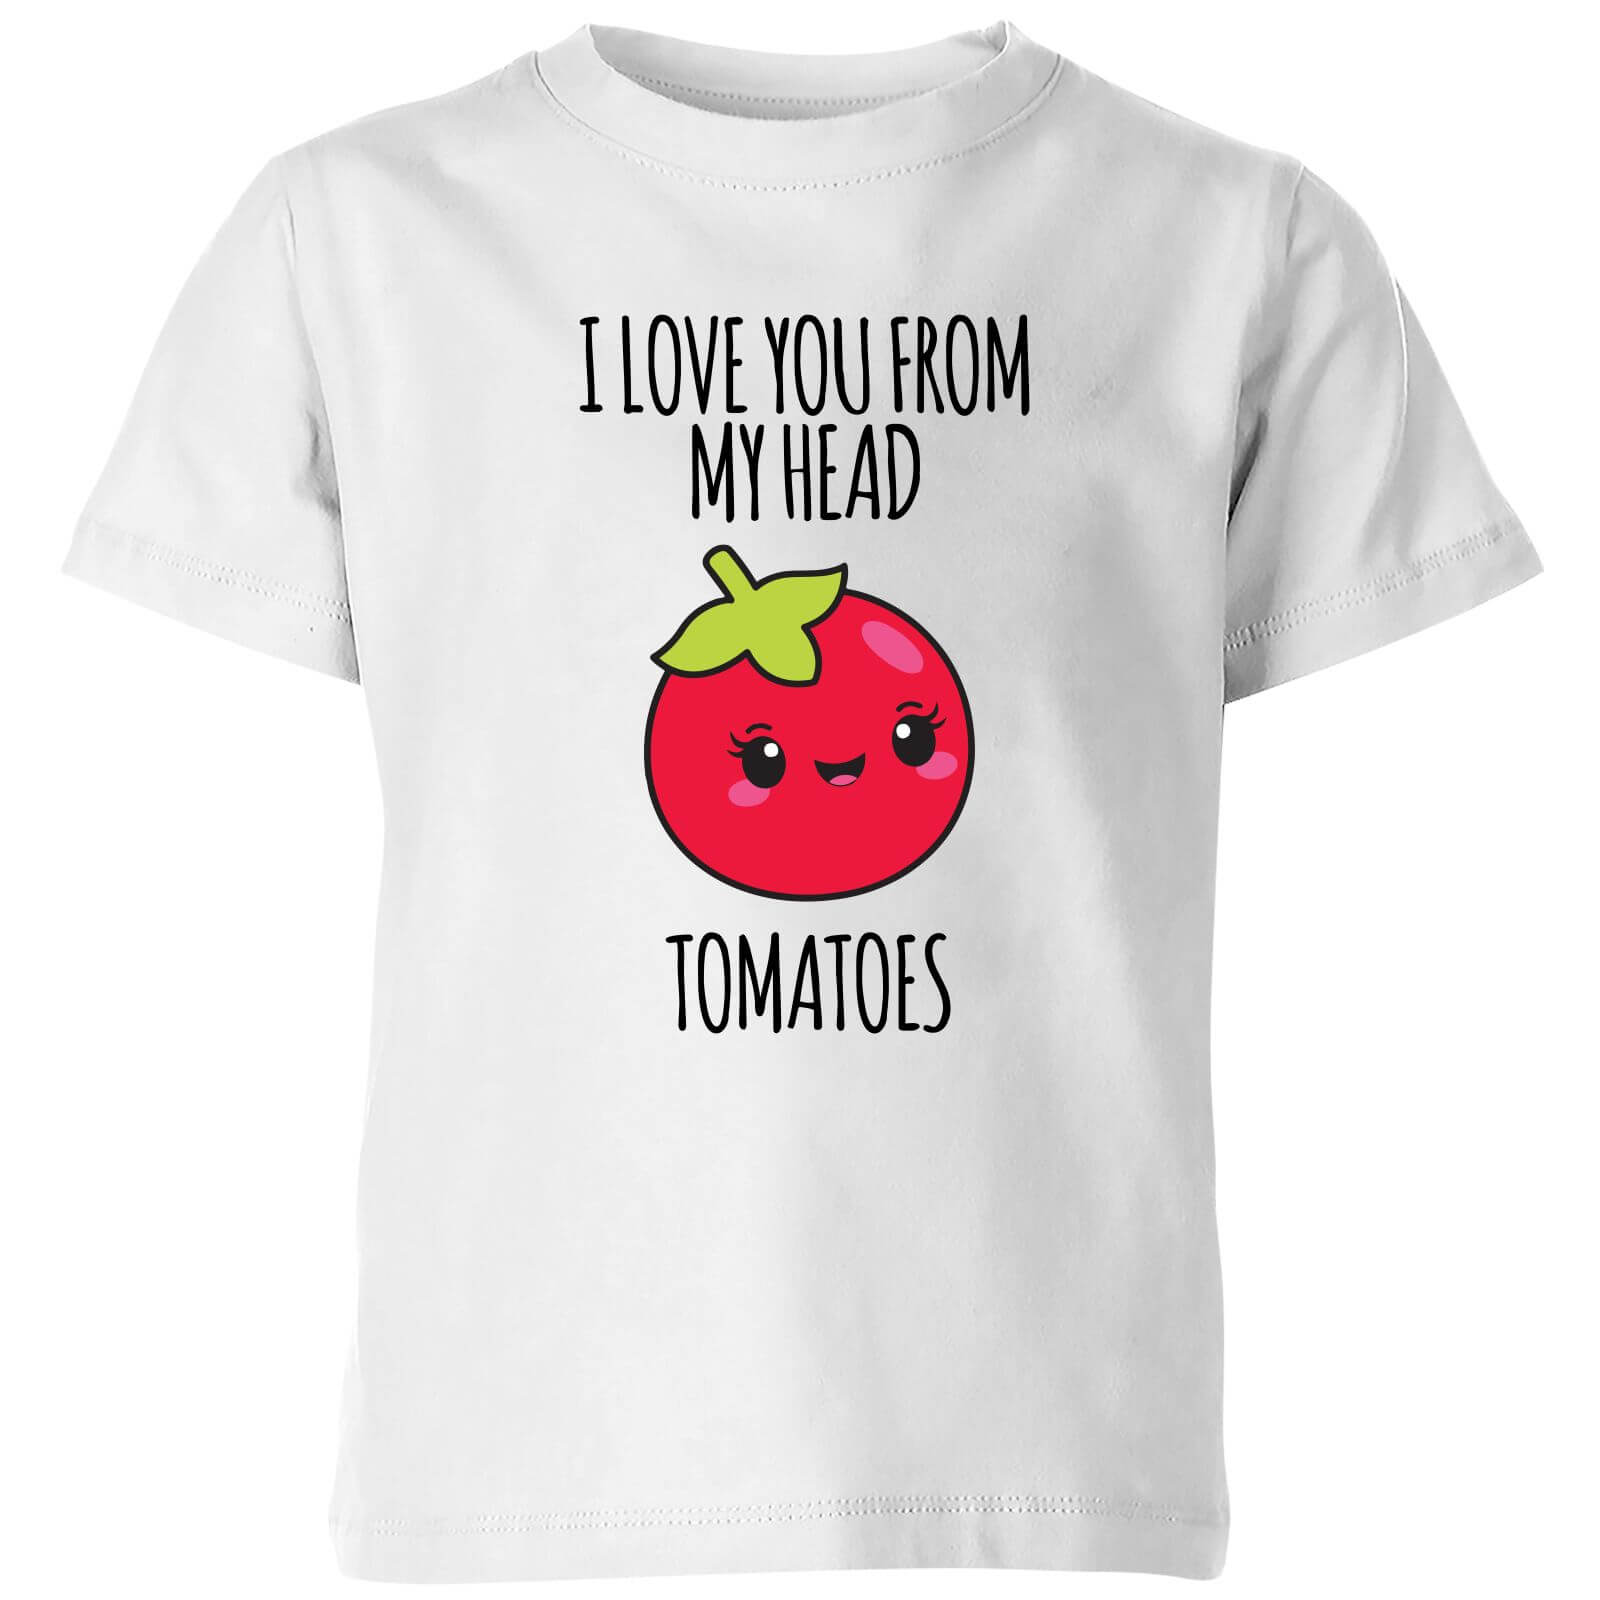 My Little Rascal I Love You From My Head Tomatoes Kids' T-Shirt - White - 3-4 Years - White